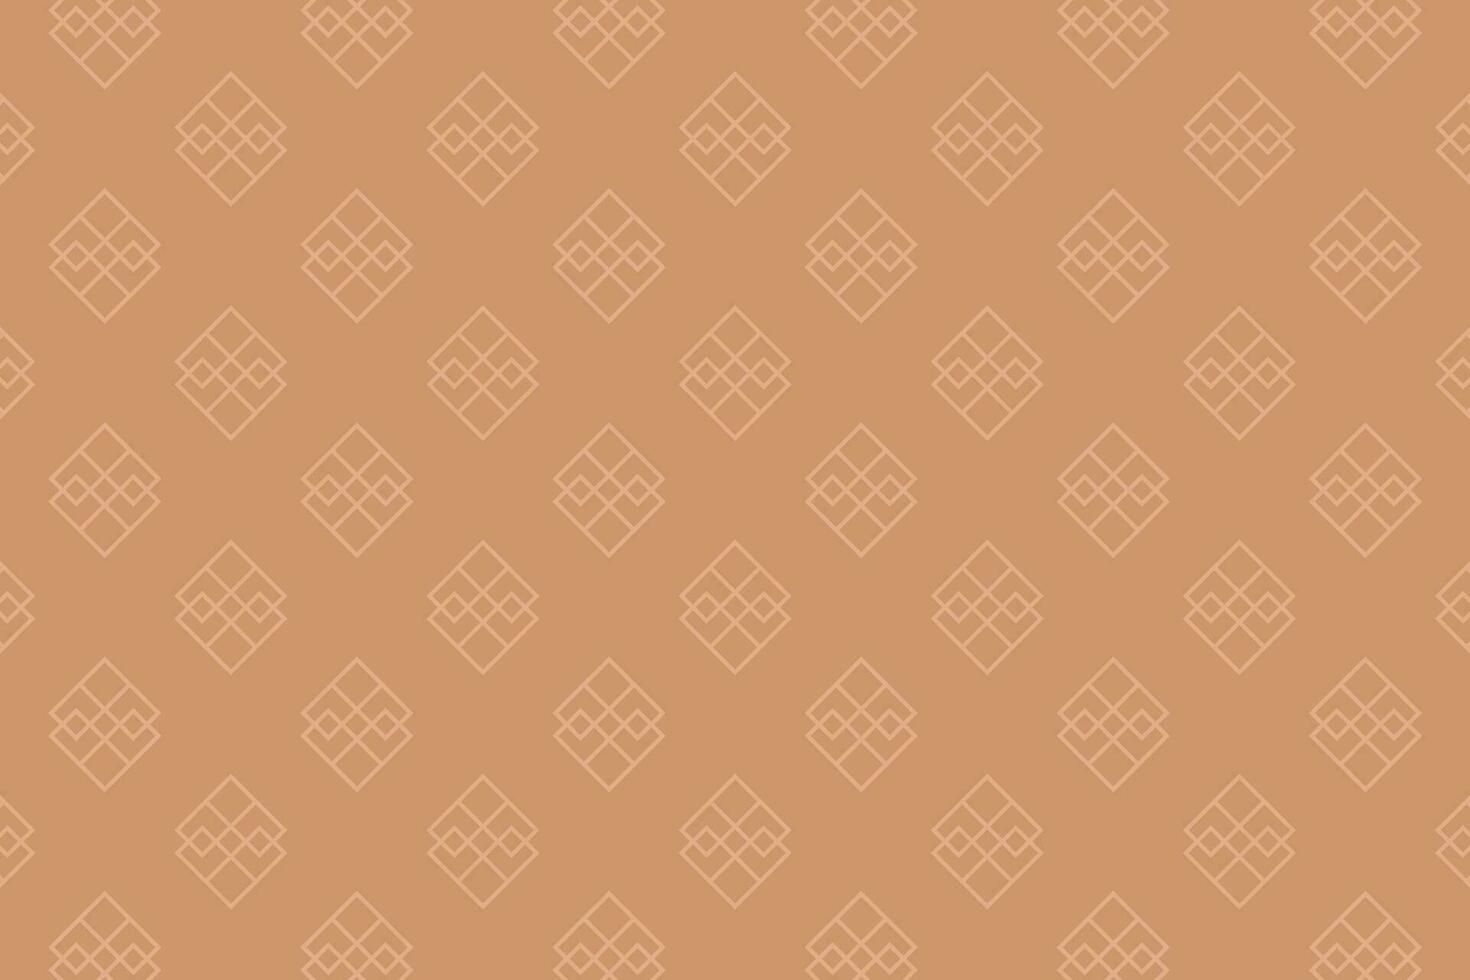 Luxury seamless pattern in brown colors. Elegant background vector illustration.